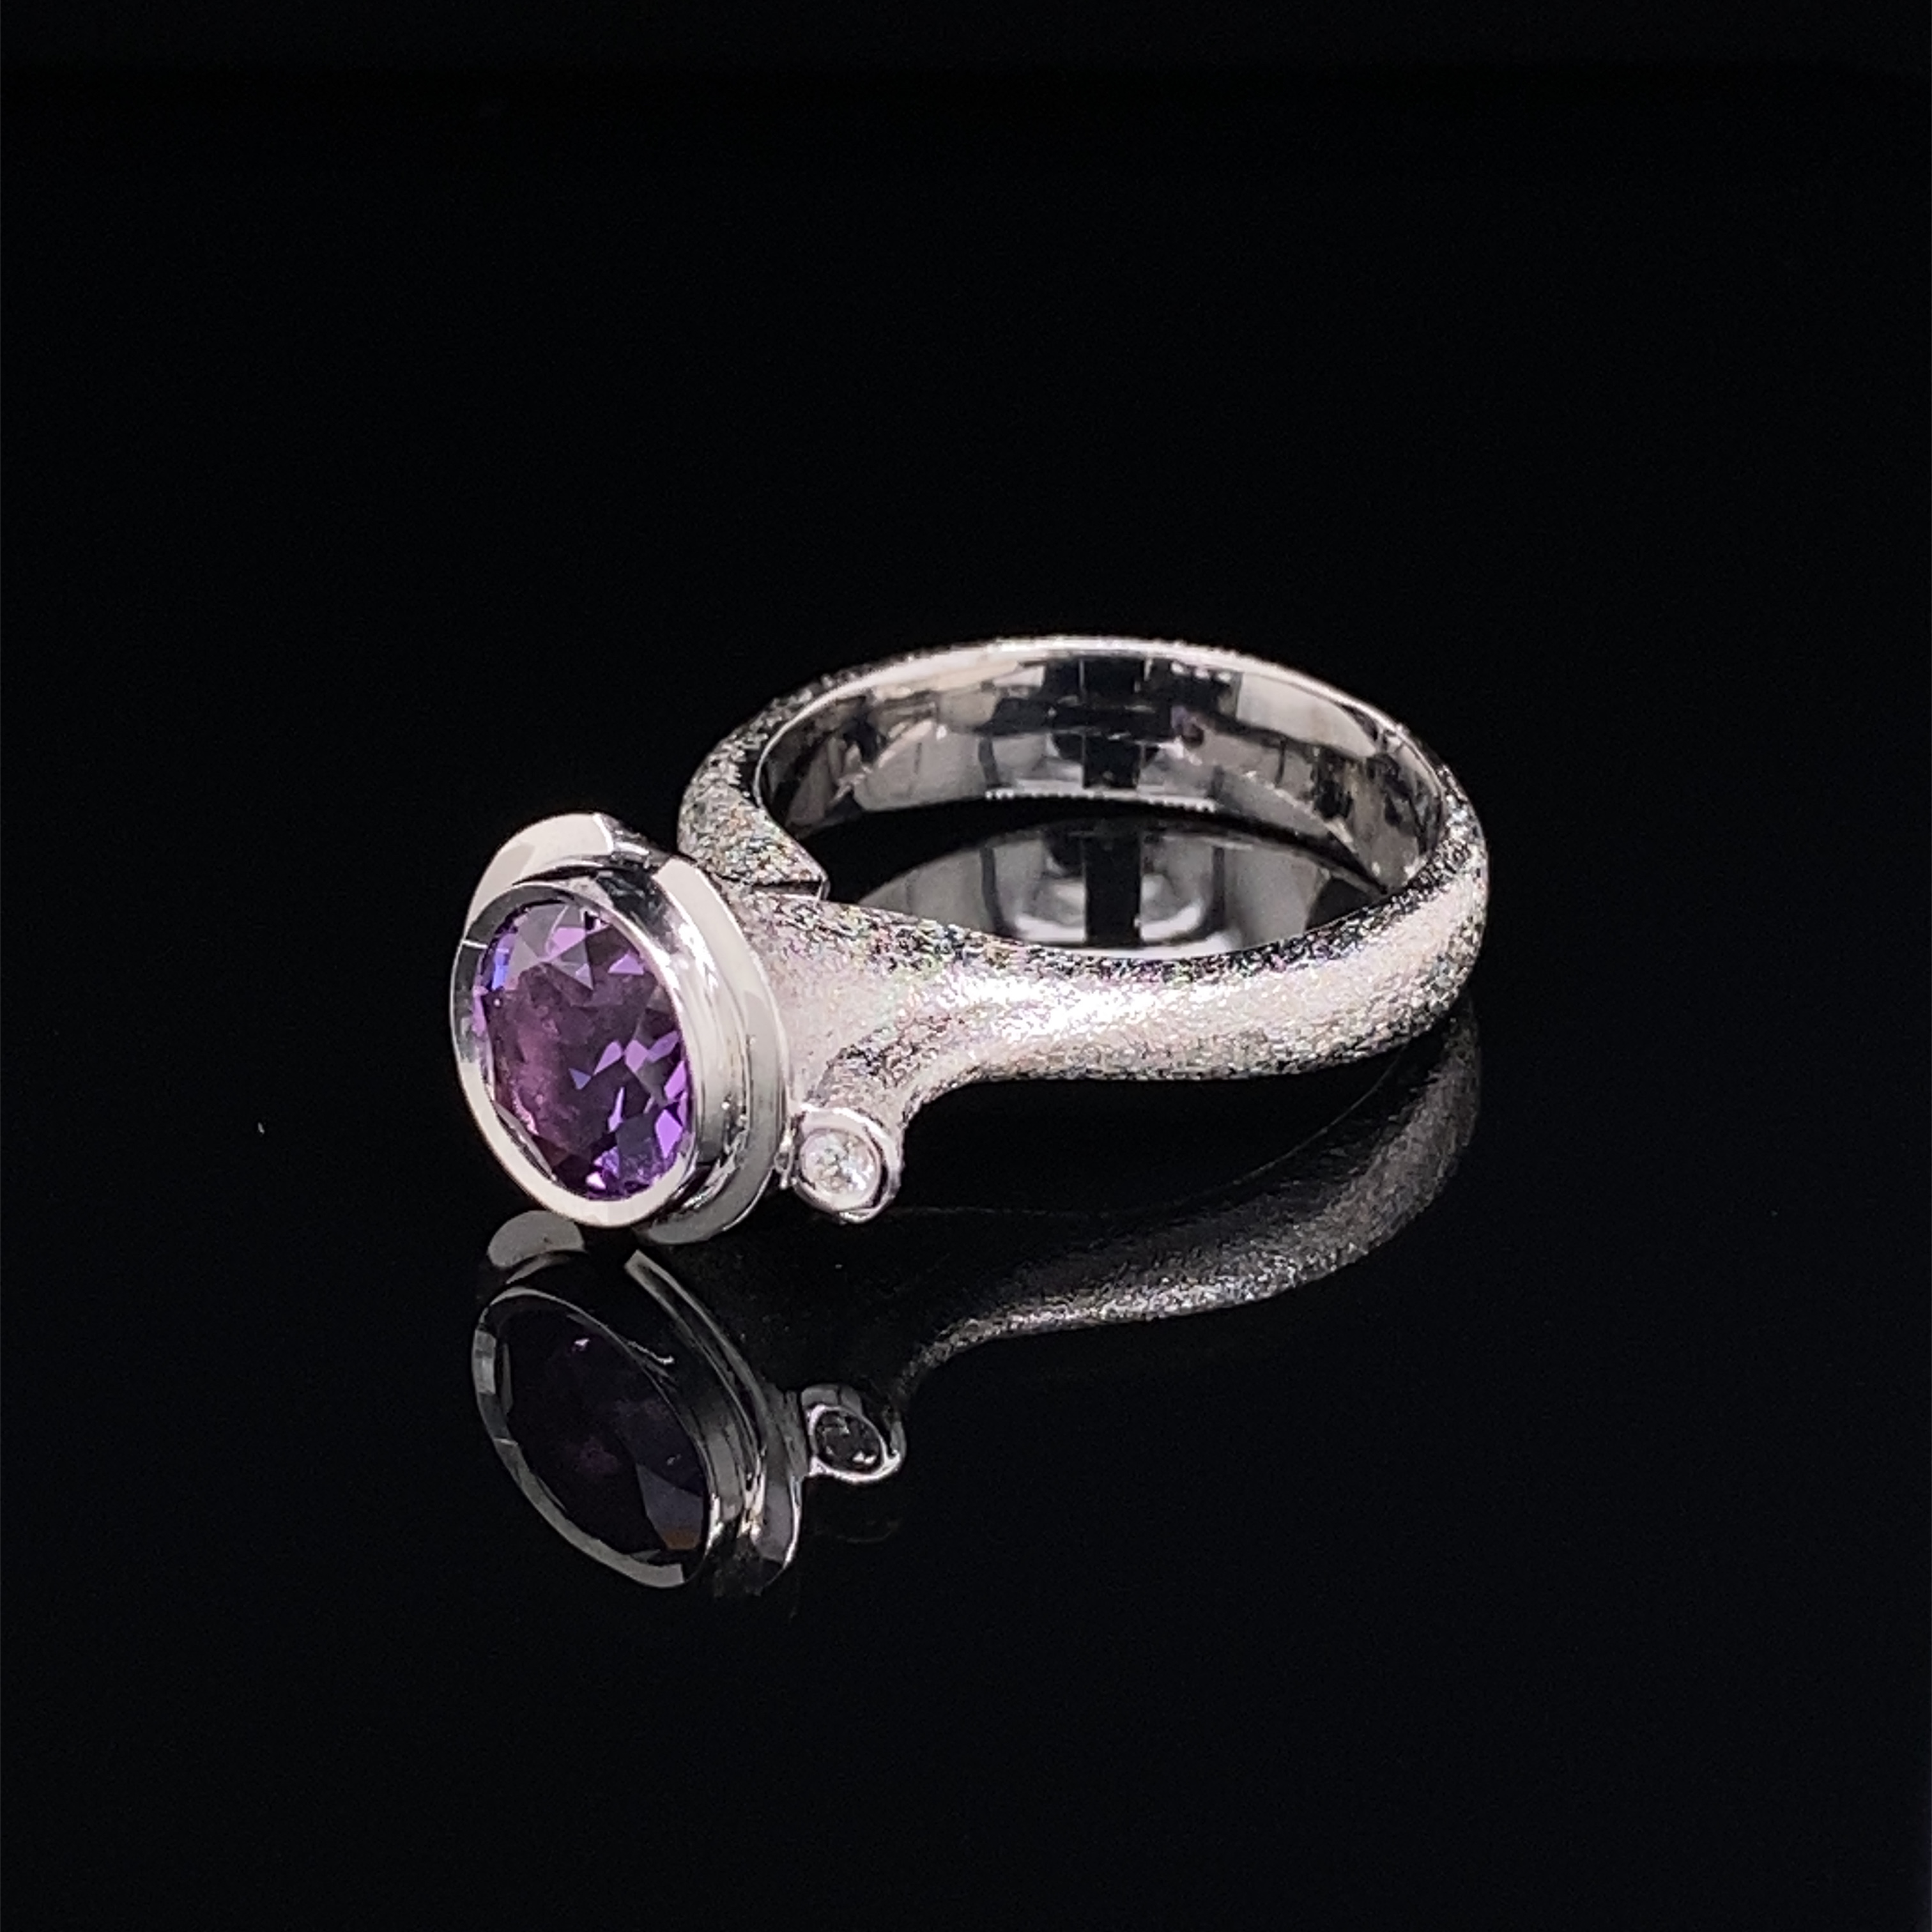 14K white gold ring with amethyst and diamond